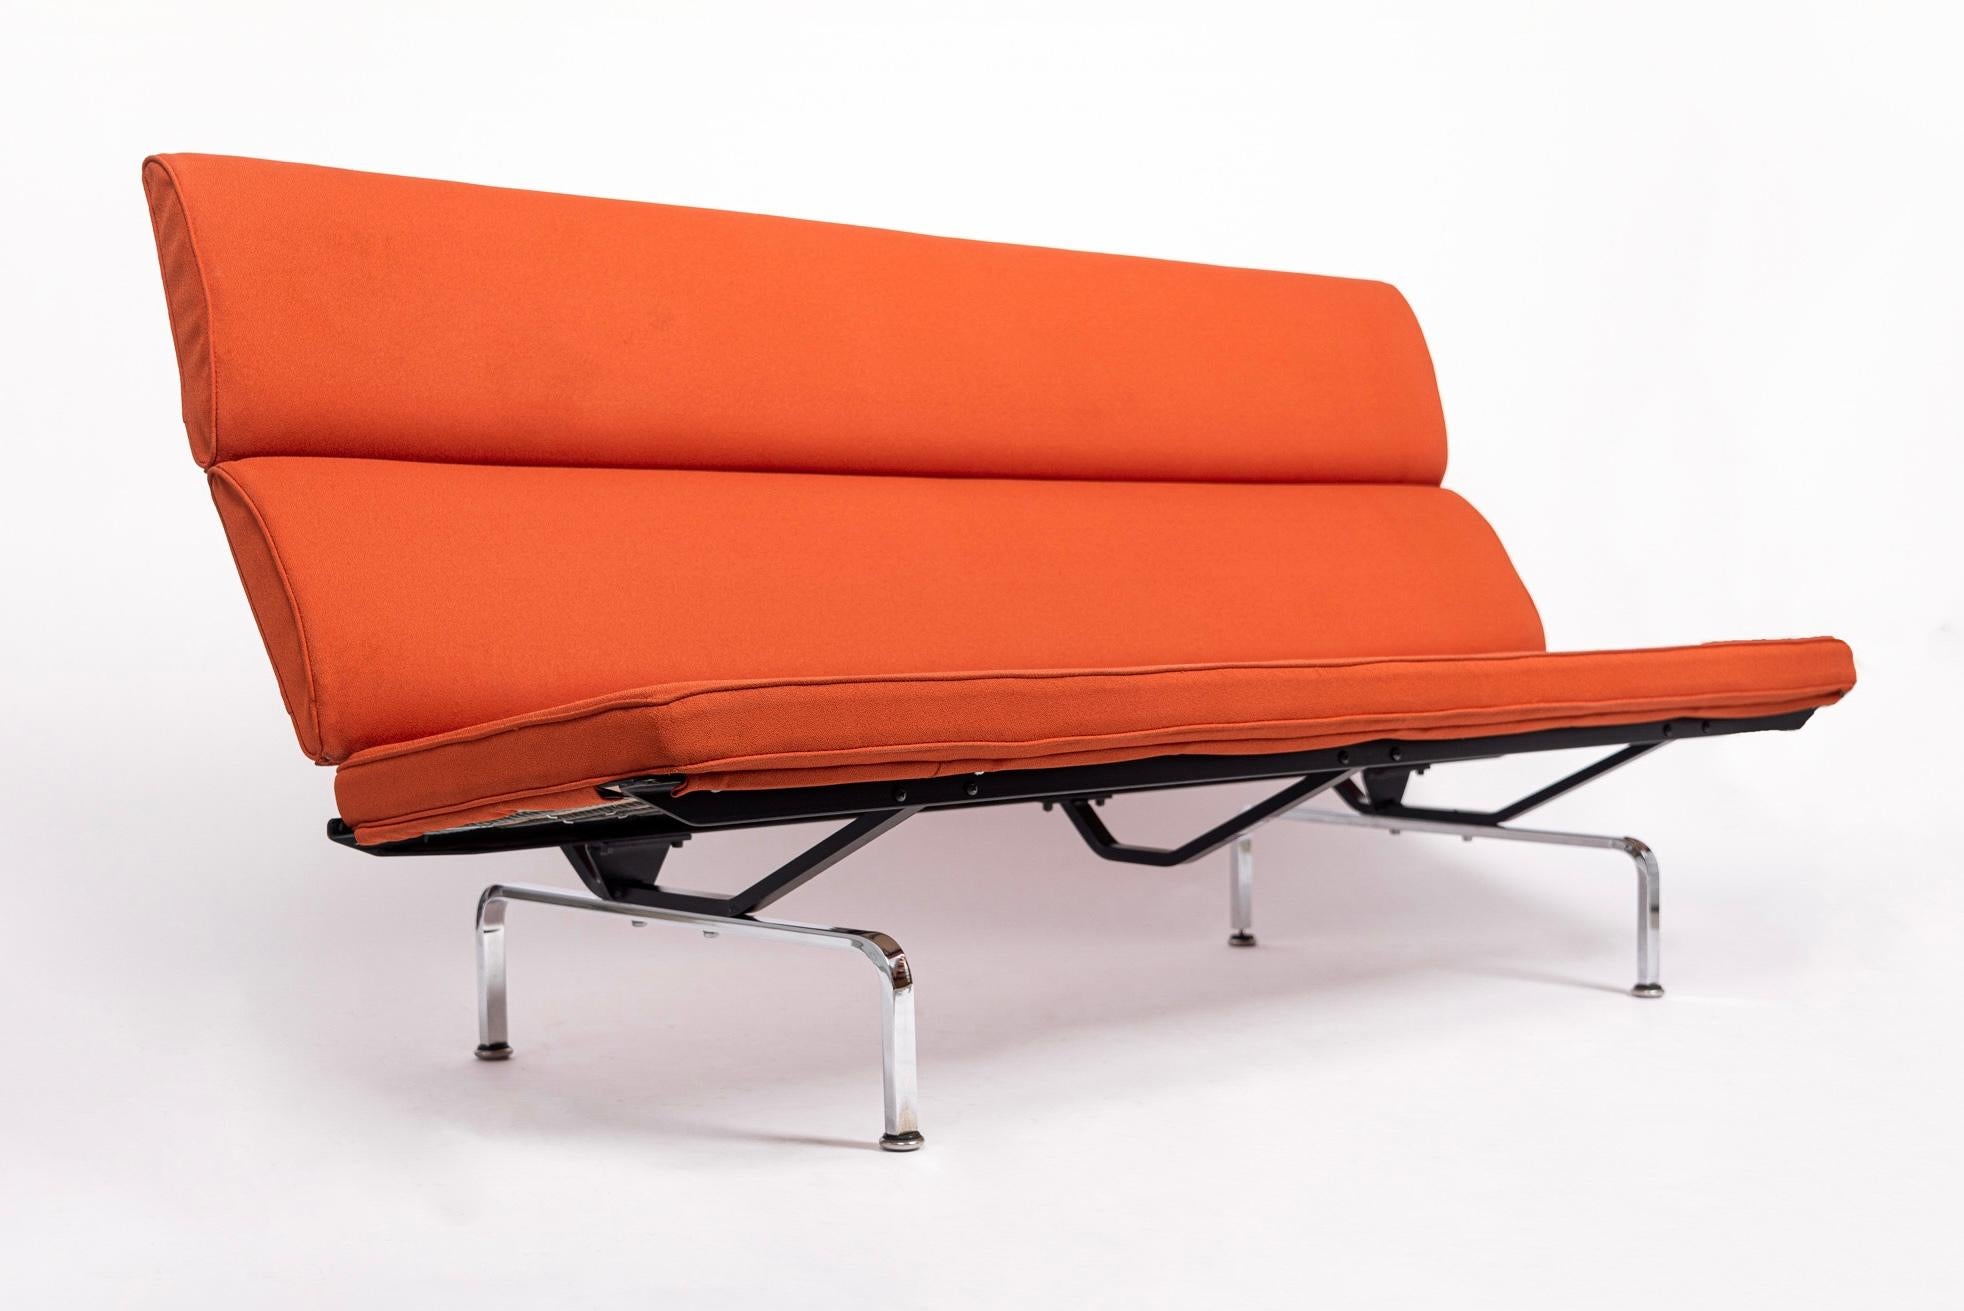 Mid-Century Modern 1970s Midcentury Orange Sofa Compact by Charles & Ray Eames for Herman Miller